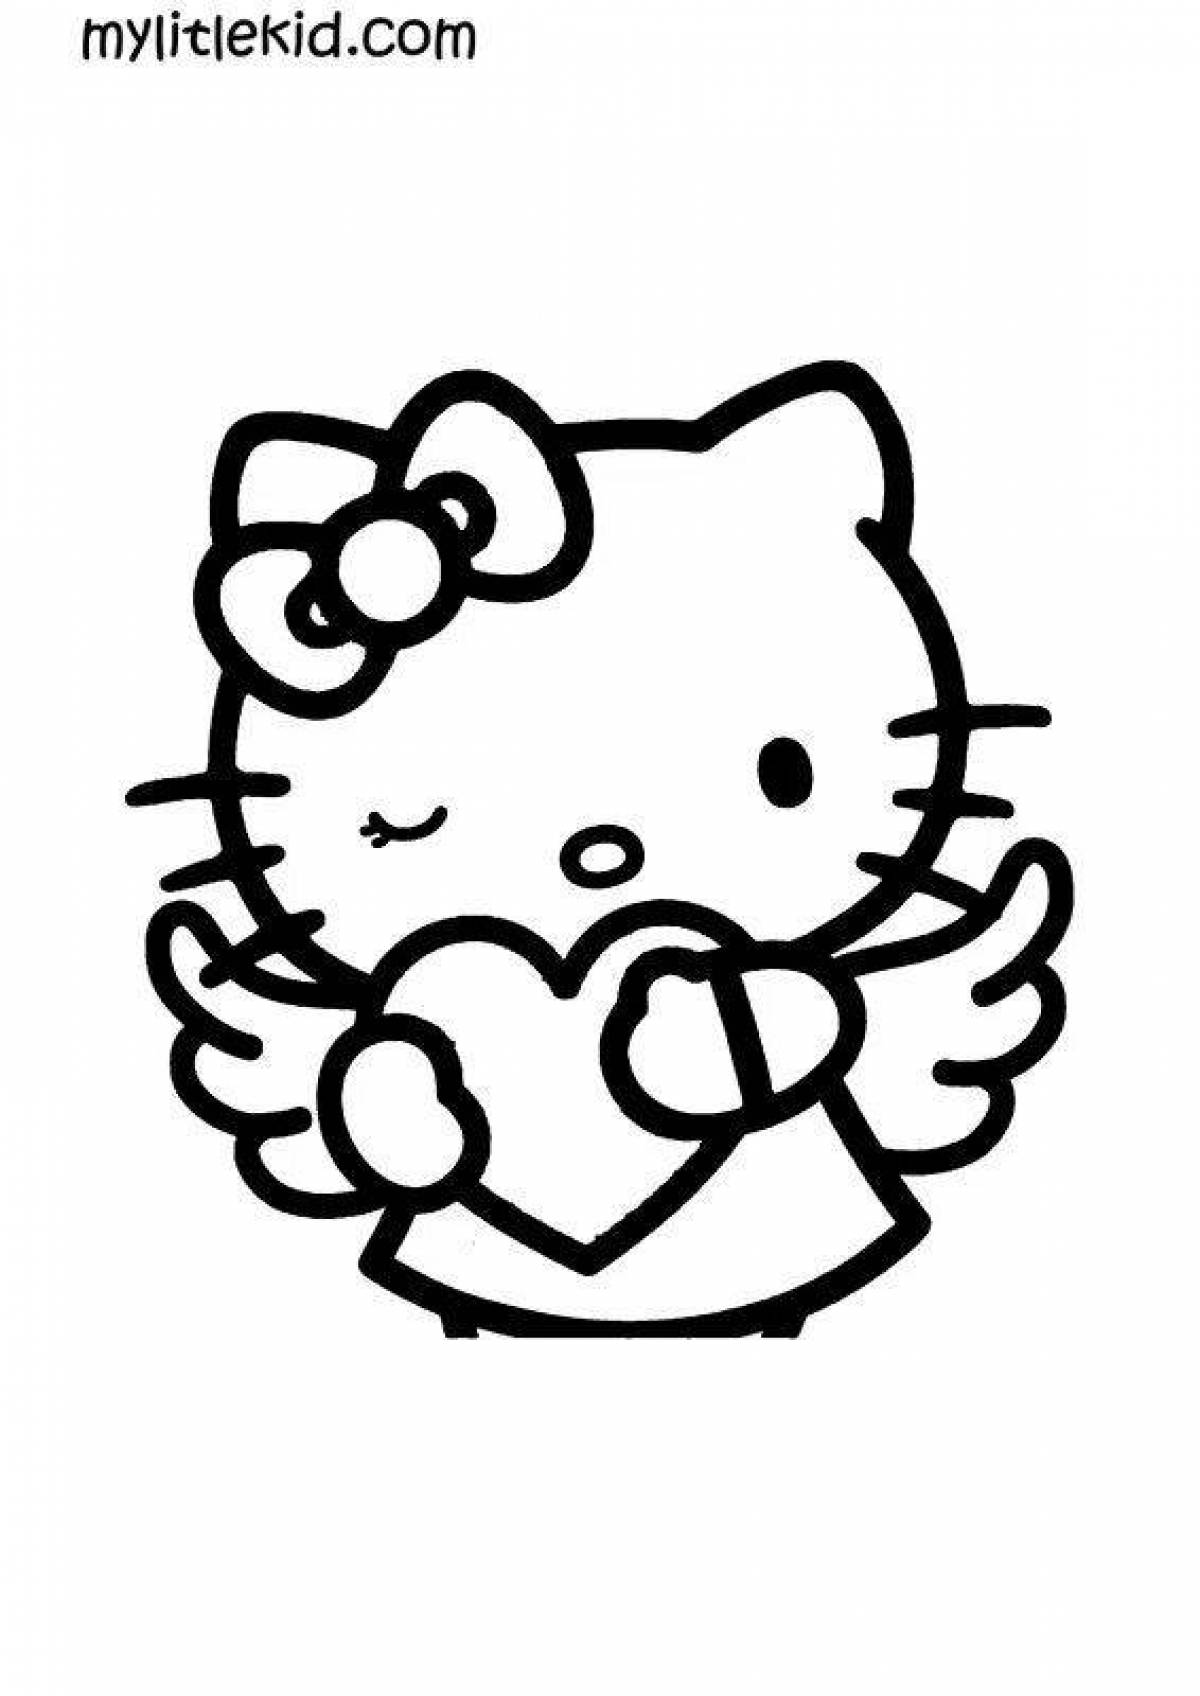 Colorful hello kitty face coloring page